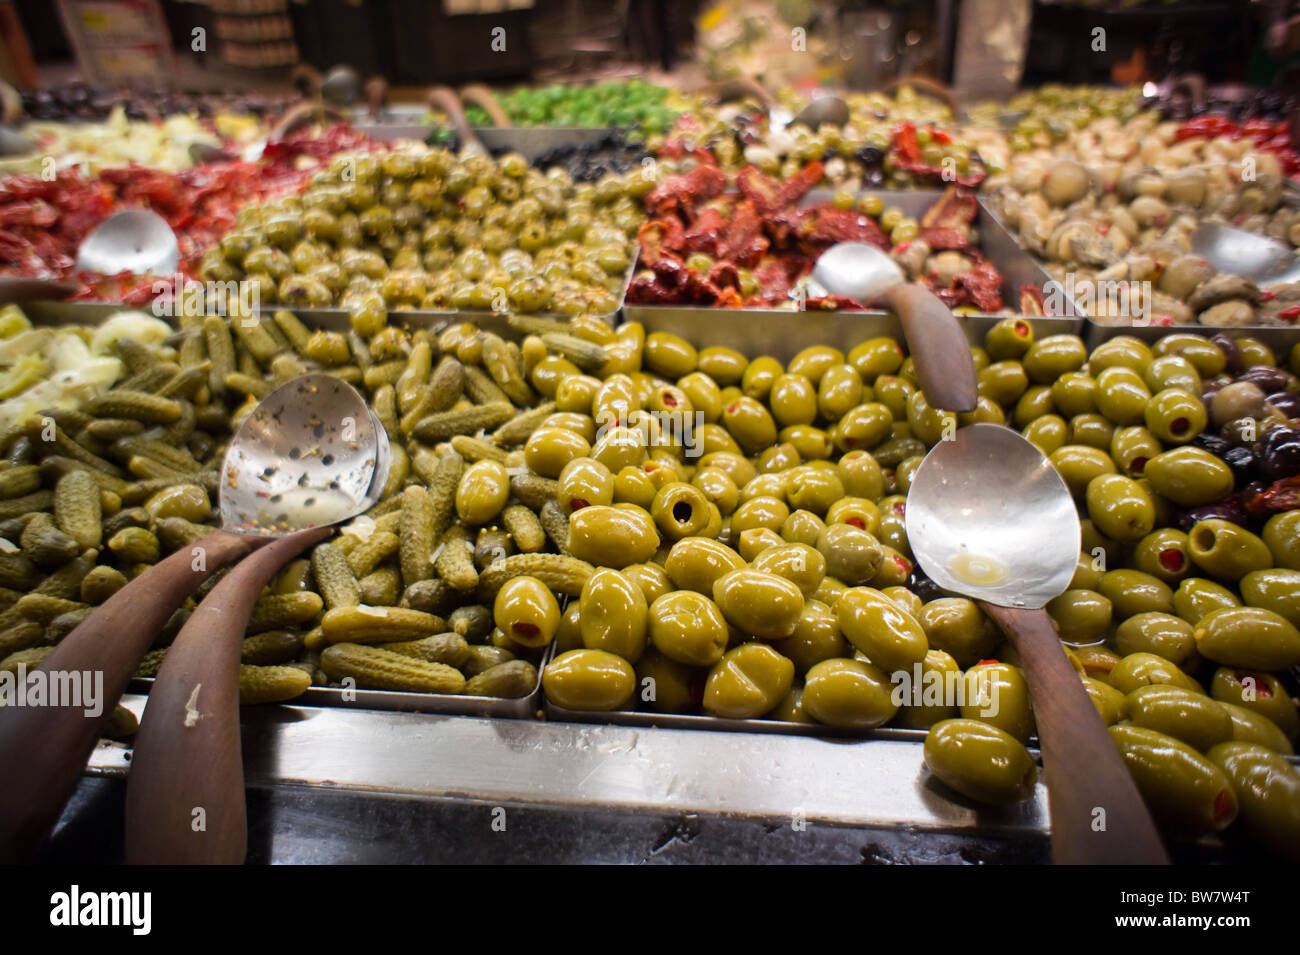 Olives and other pickles in the olive bar in the Whole Foods supermarket in the Tribeca neighborhood of New York Stock Photo